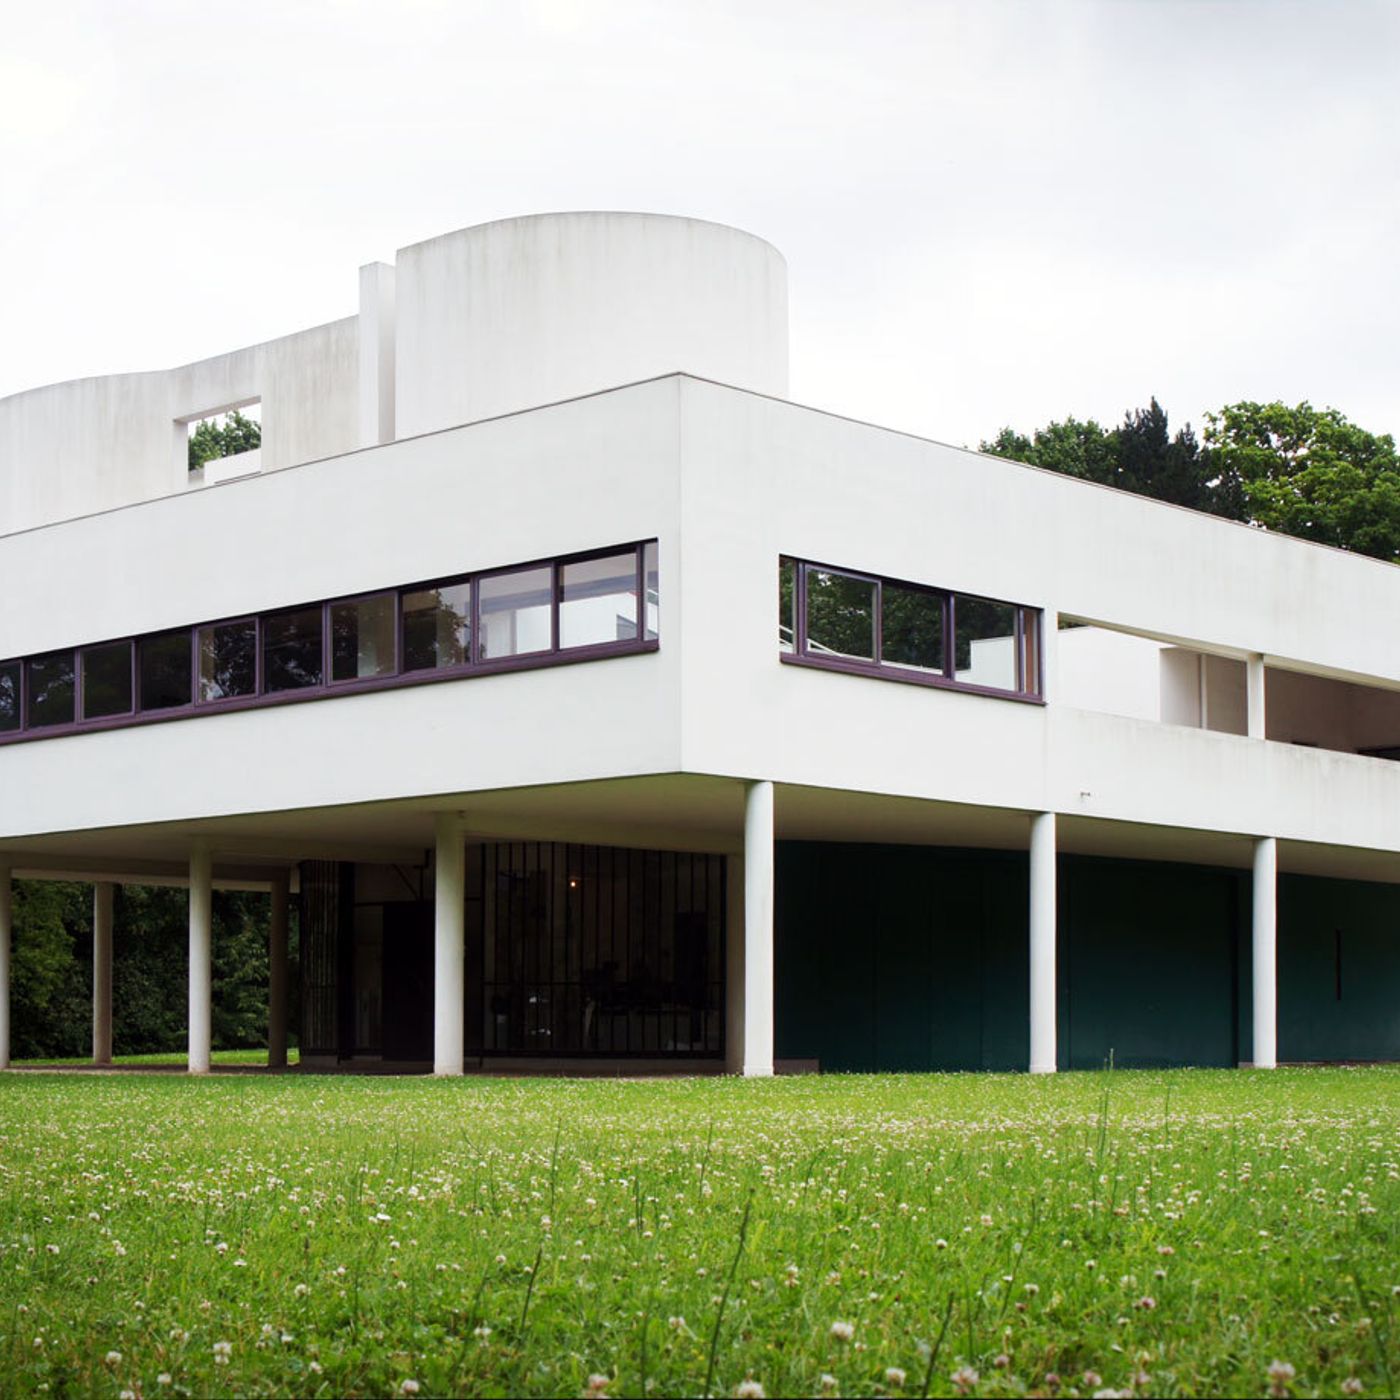 12: The Story of Villa Savoye and Le Corbusier